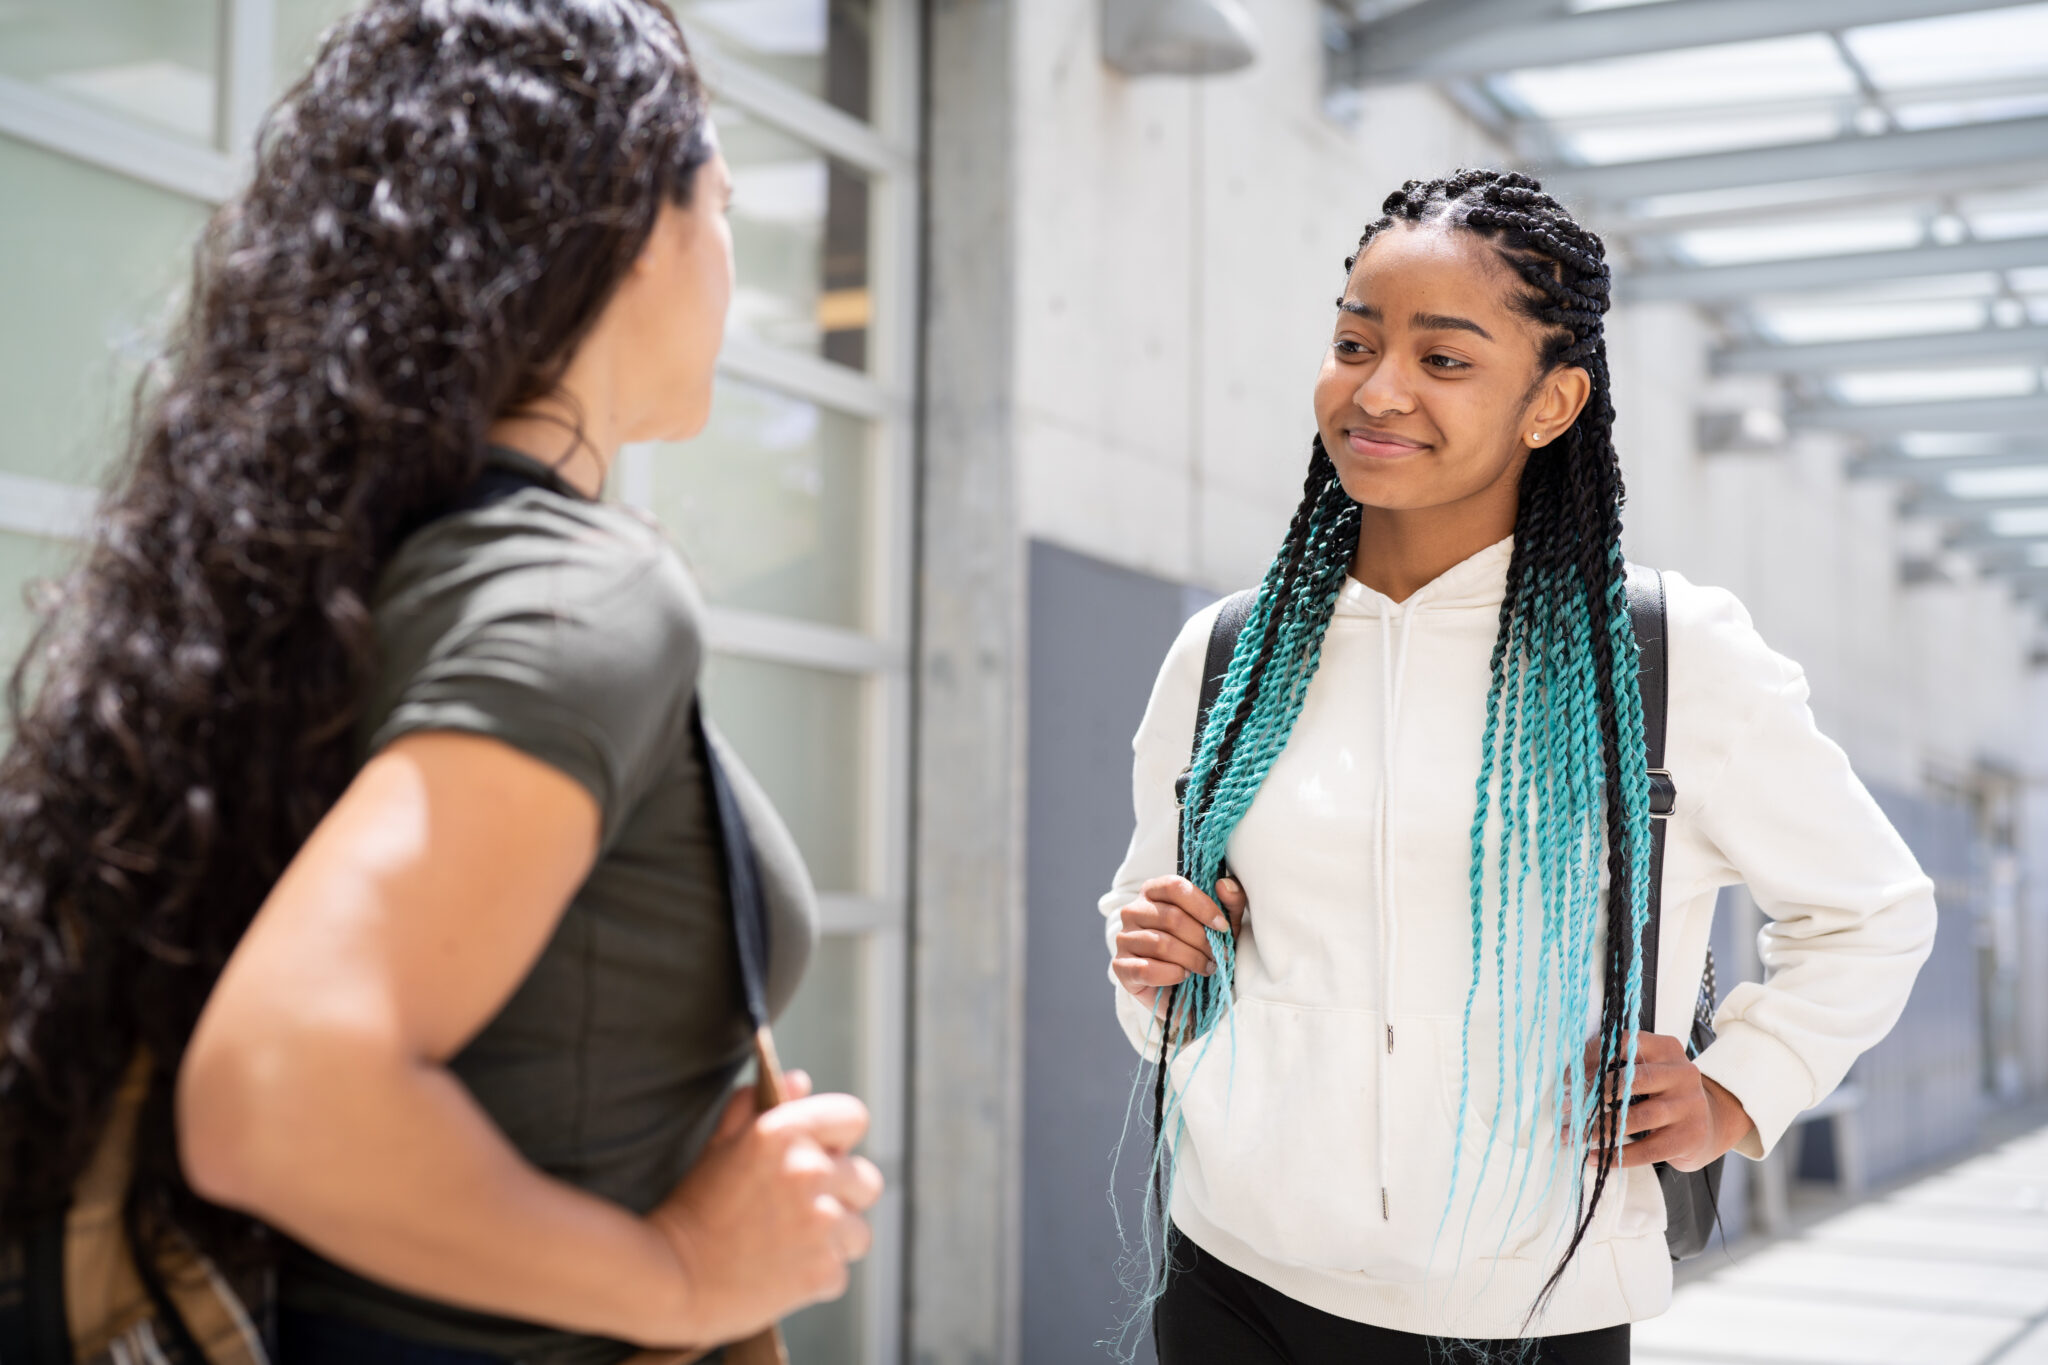 A student wearing a white button down shirt, is wearing her hair in braids with teal tips, speaks to another student on campus